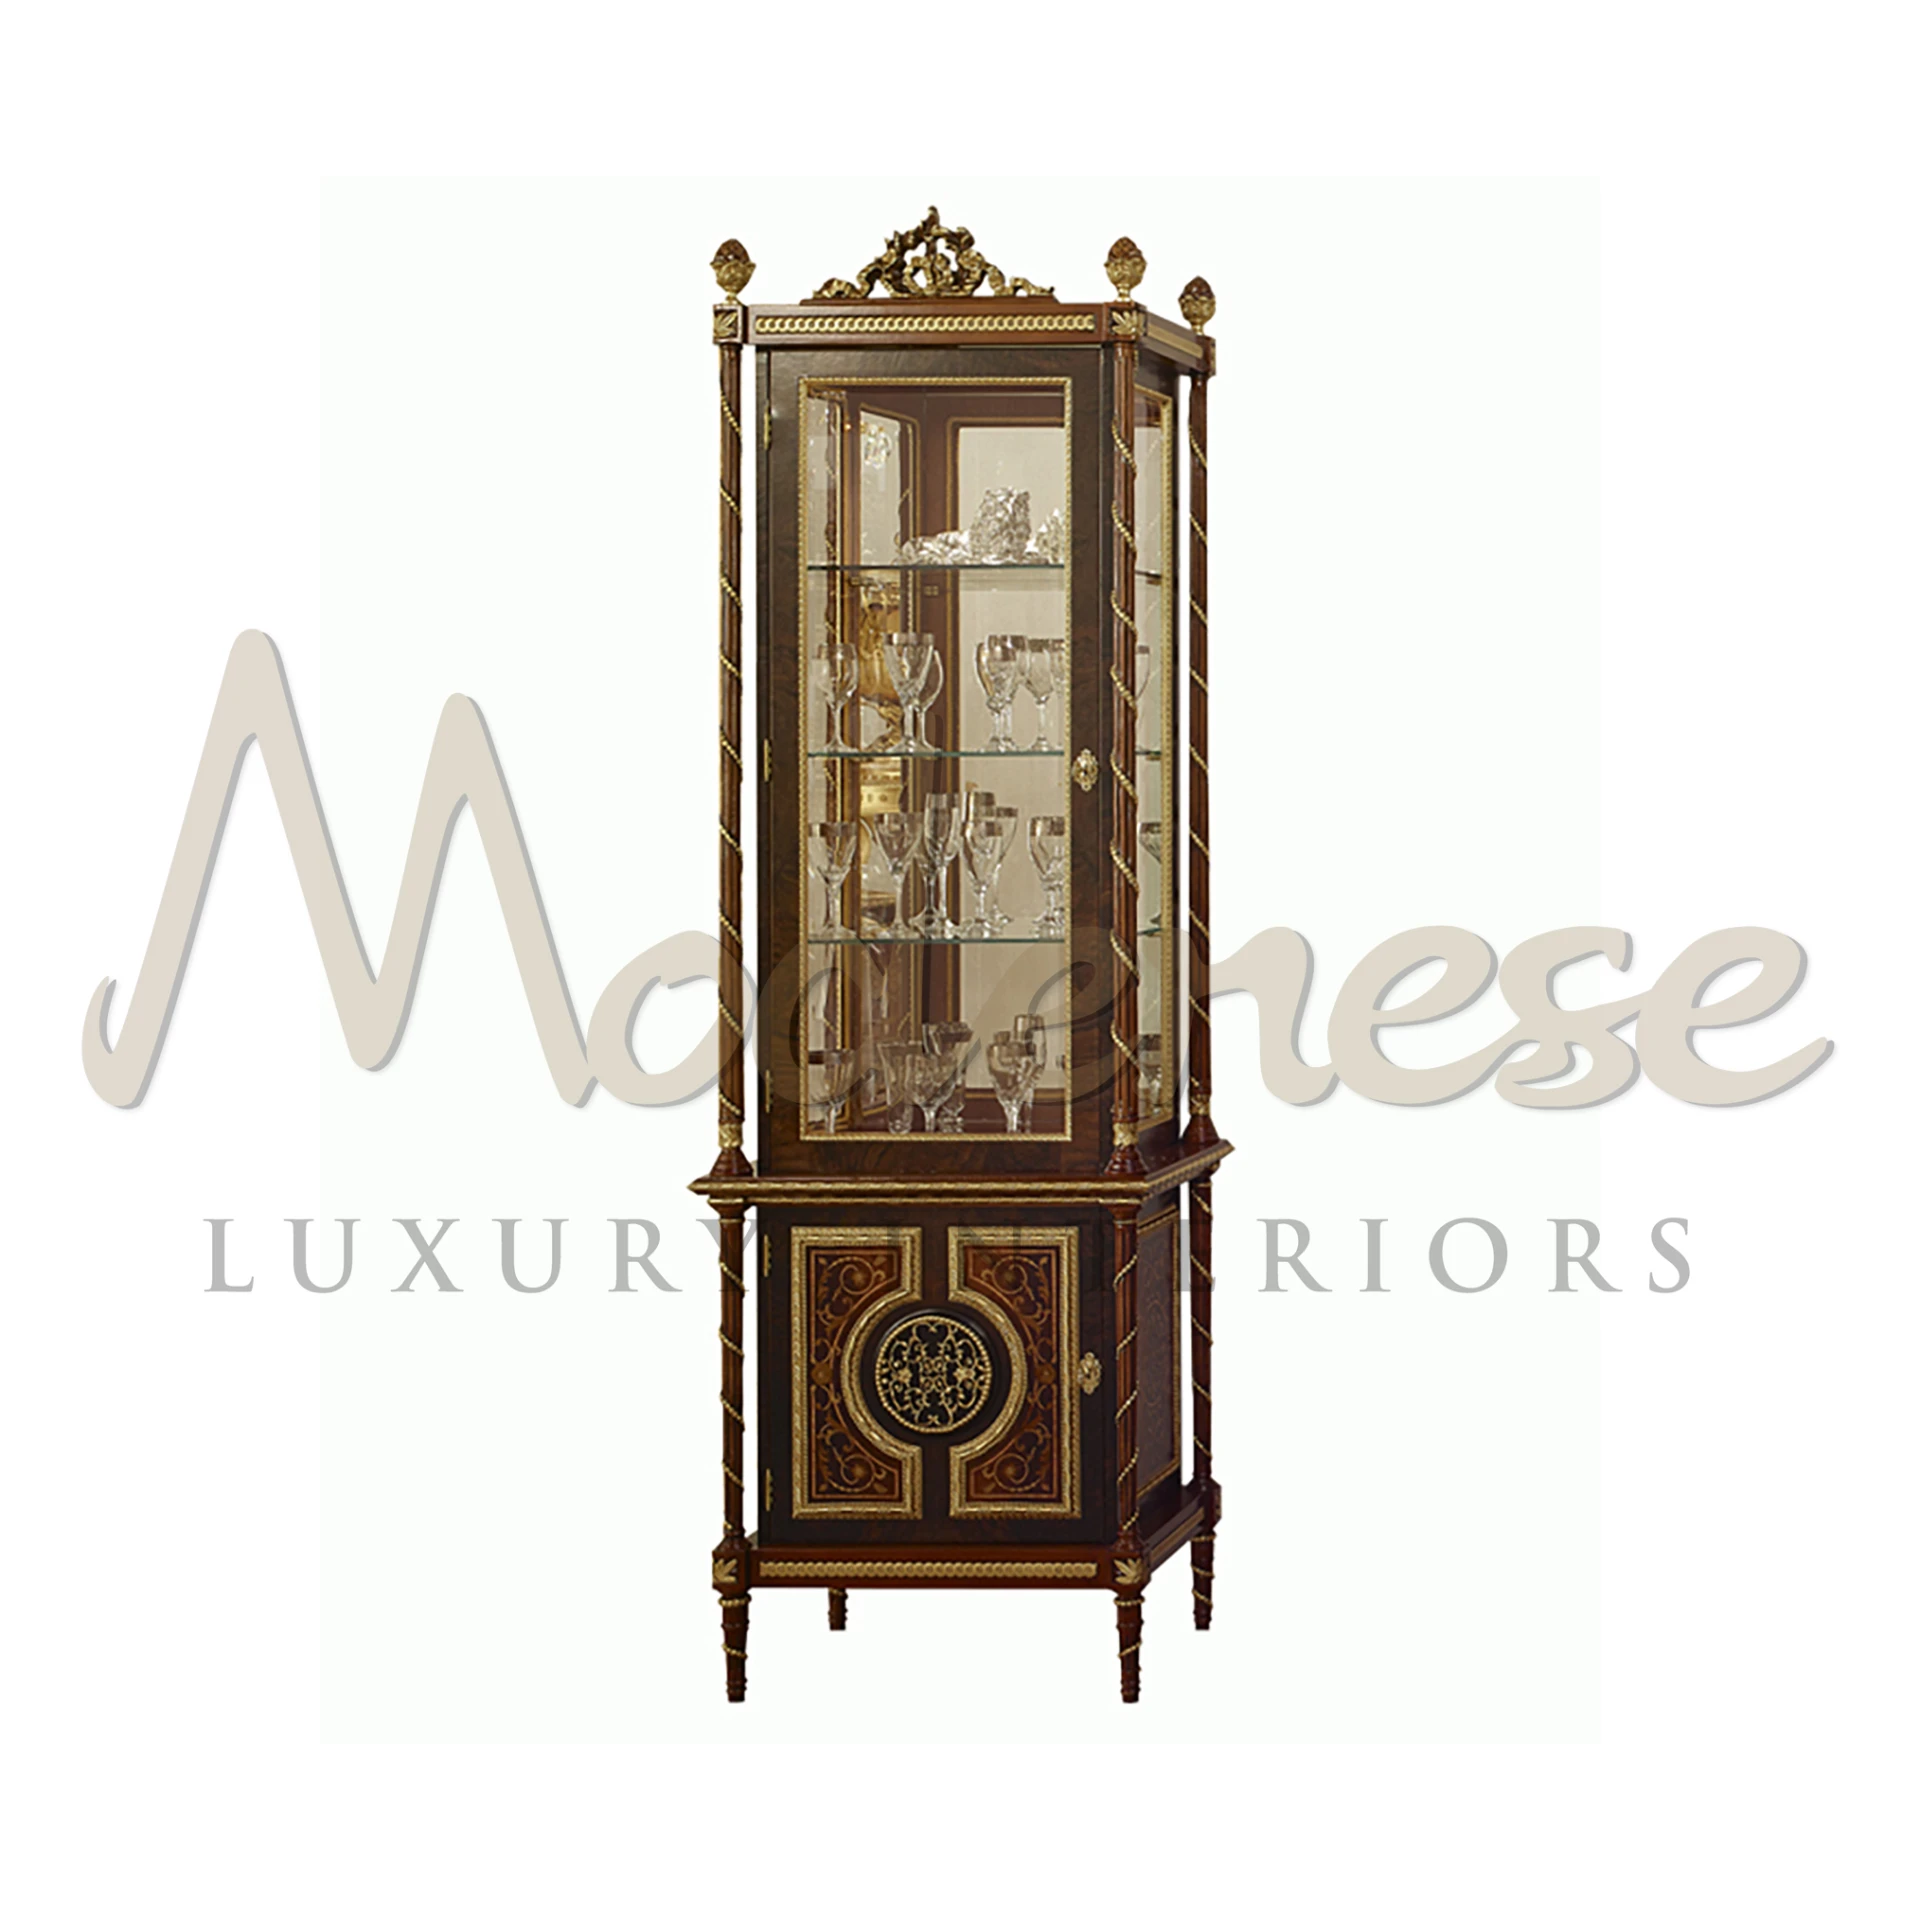 Transform your space with Modenese Luxury Interior furniture. This majestic vitrine boasts empire-style revival, intricate inlays, and gold leaf decorations.